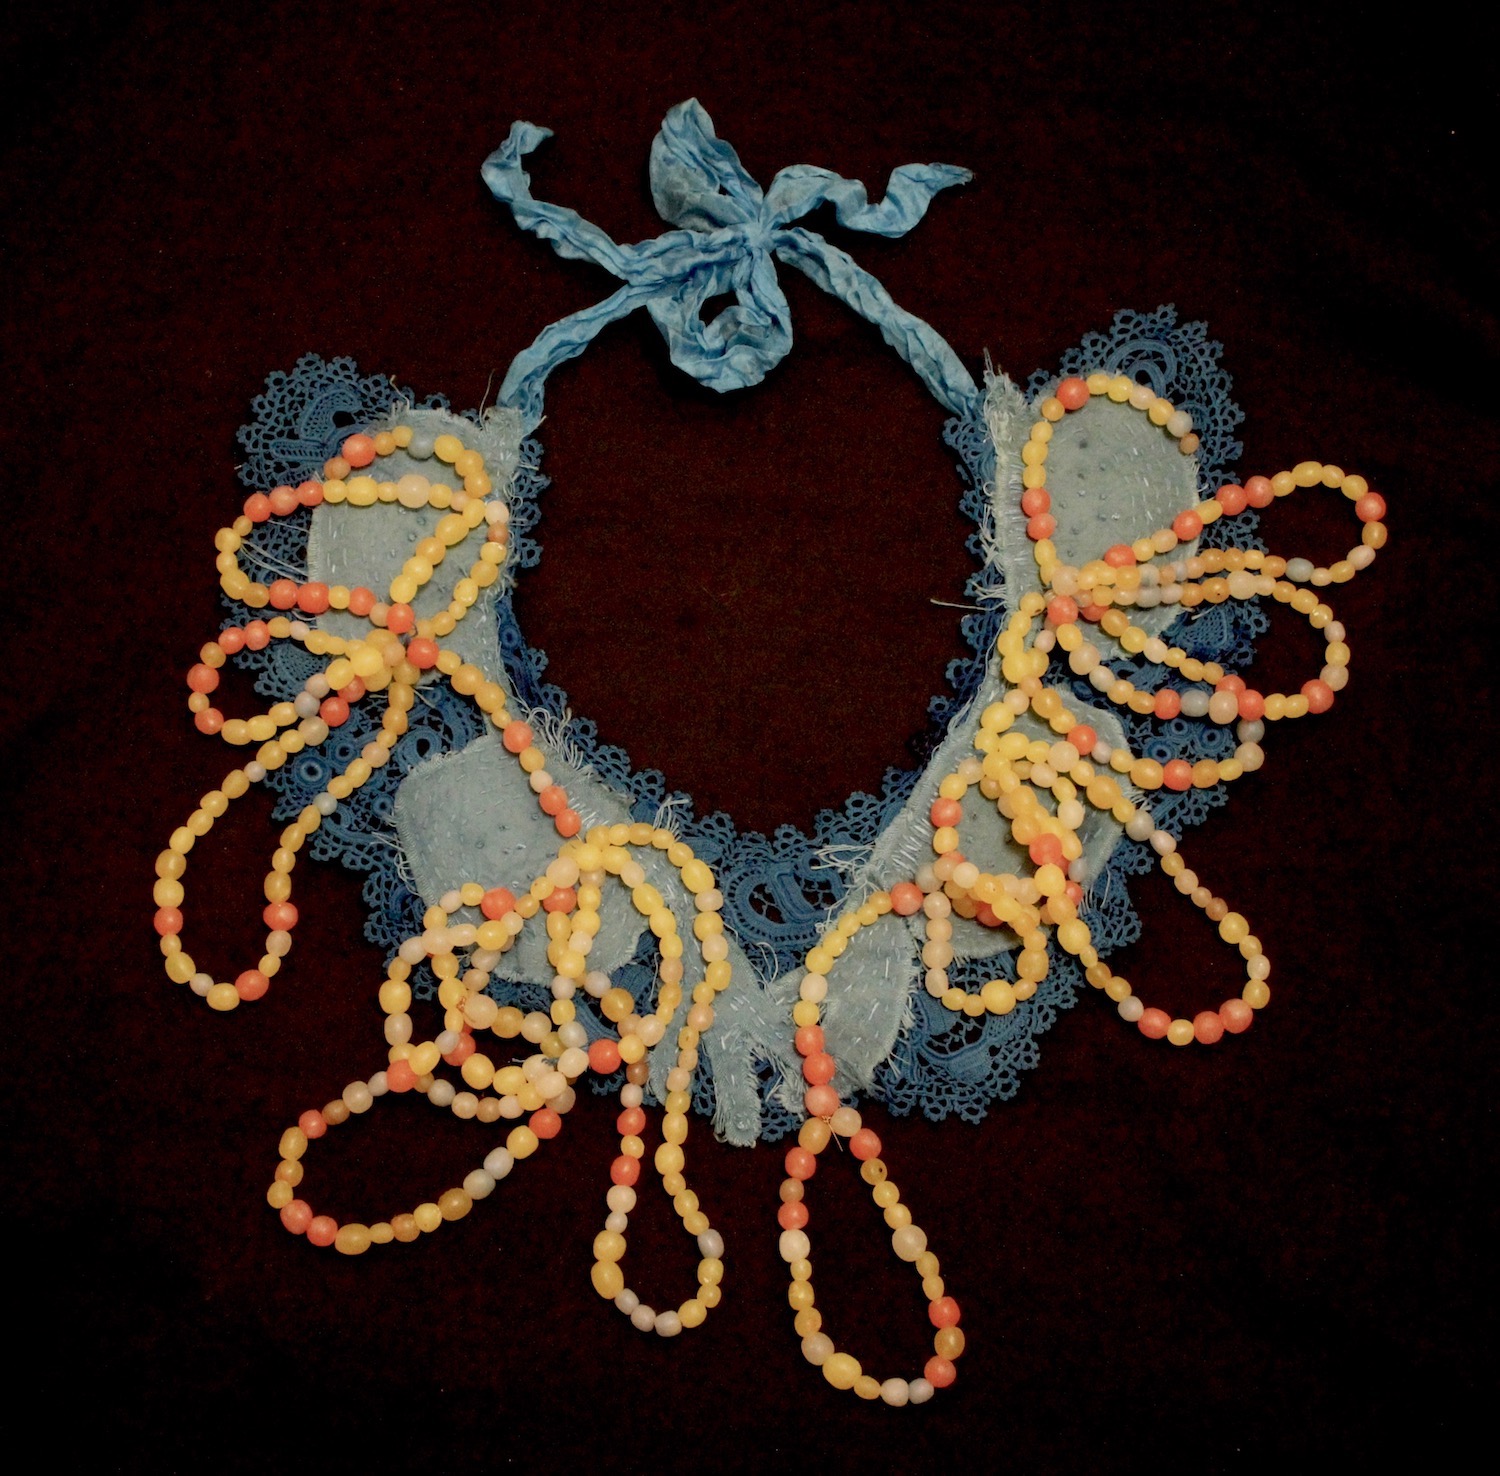 A multi-layered necklace with a flat blue lace base, grey fabric overlay, and an orange, white, and yellow bead string looped over the top.